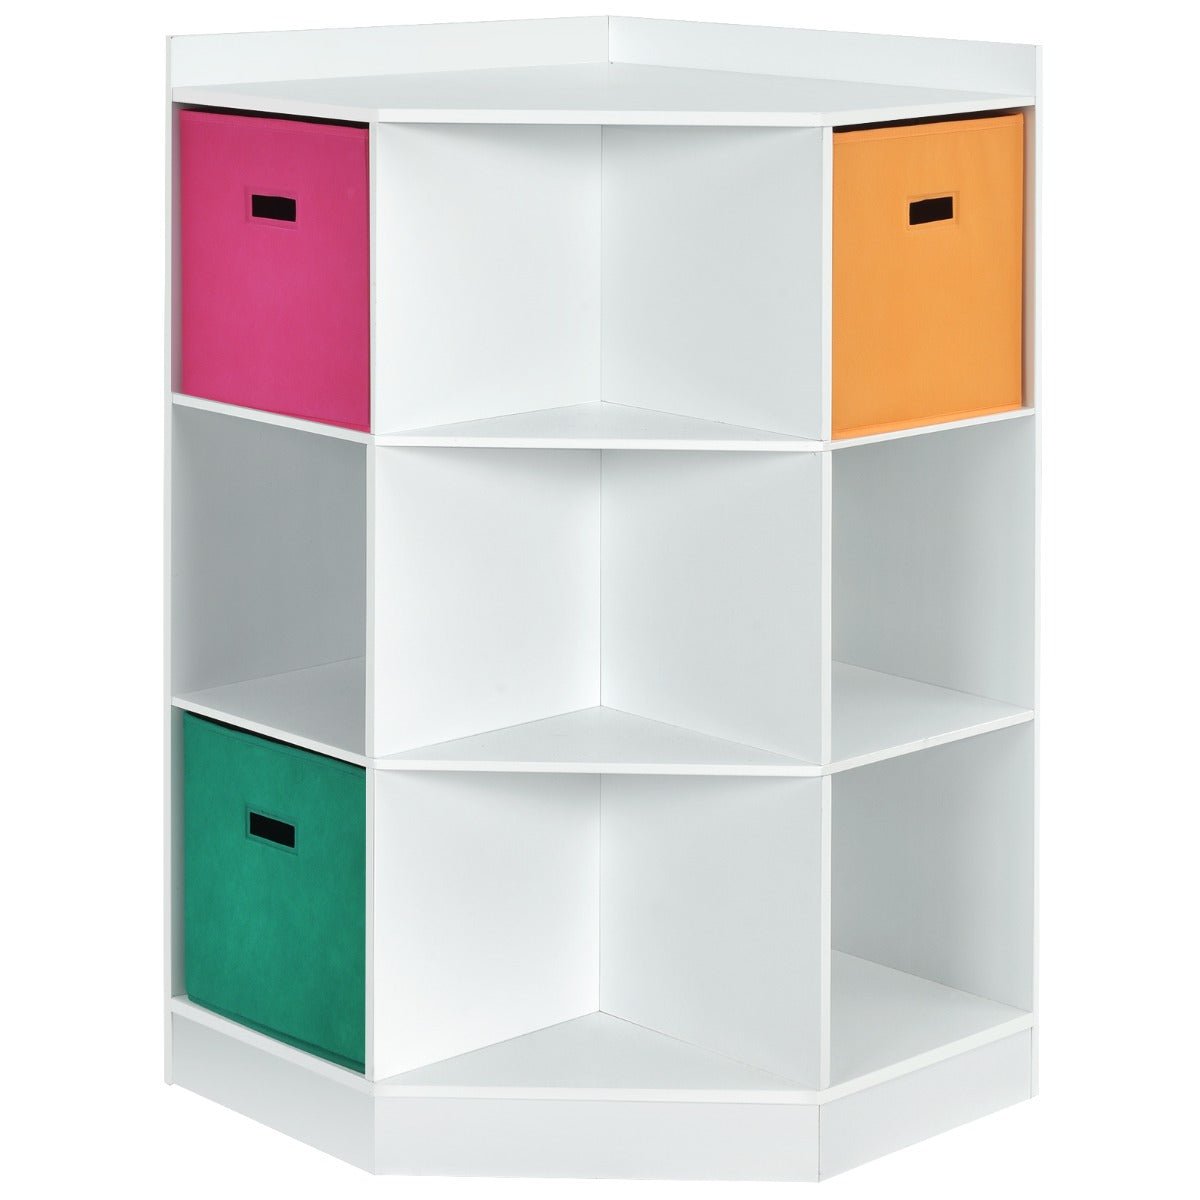 Shop 9-Section Toy Storage Organizer with 3 Multi-Color Drawers